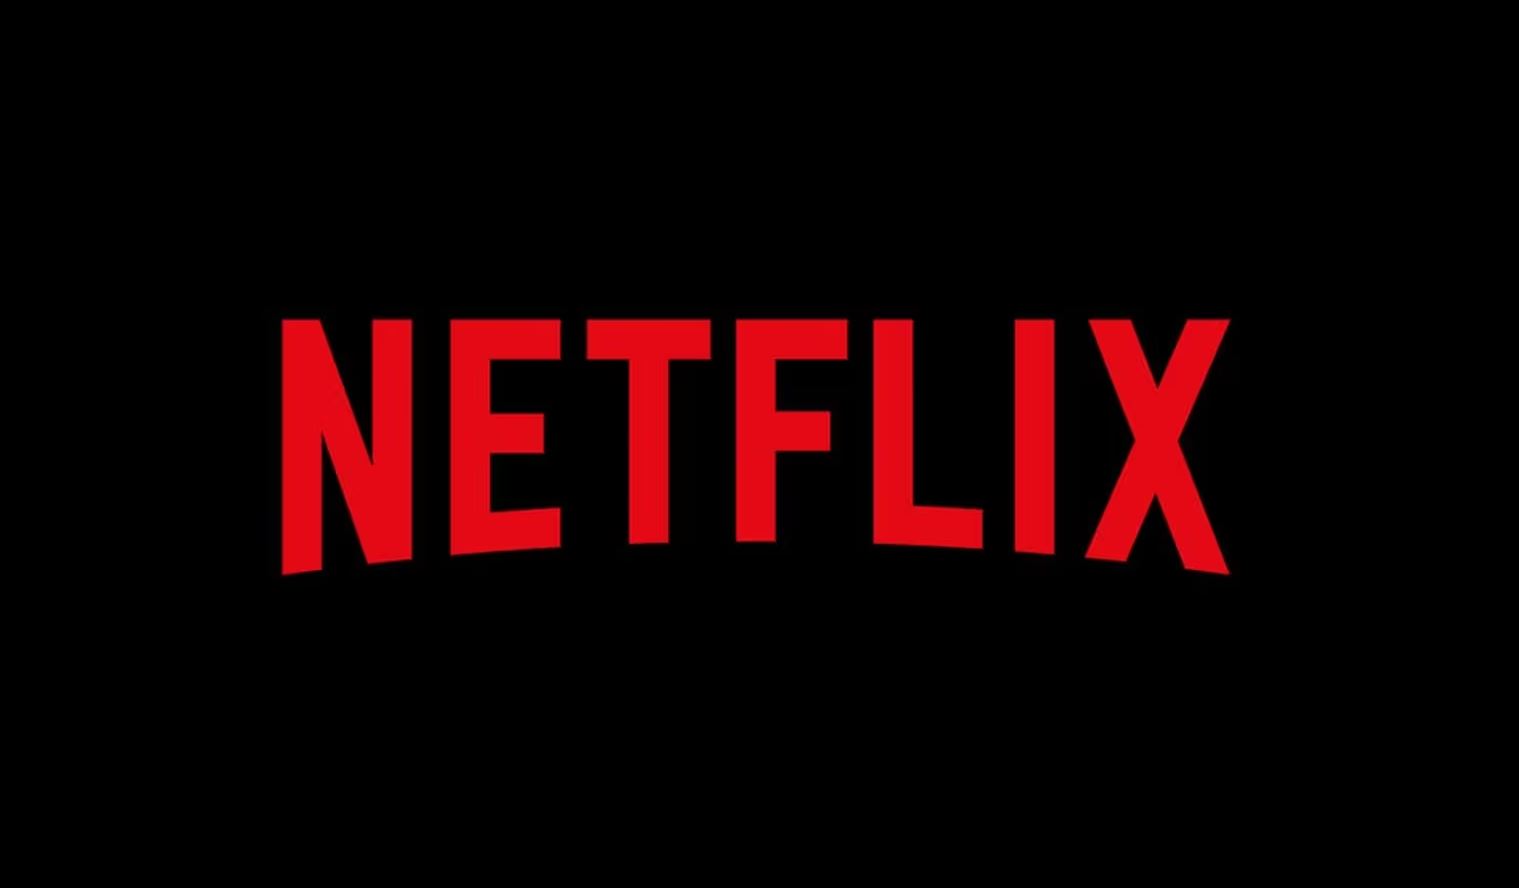 The cheaper, ad-free Netflix bundle has been discontinued in more and more places